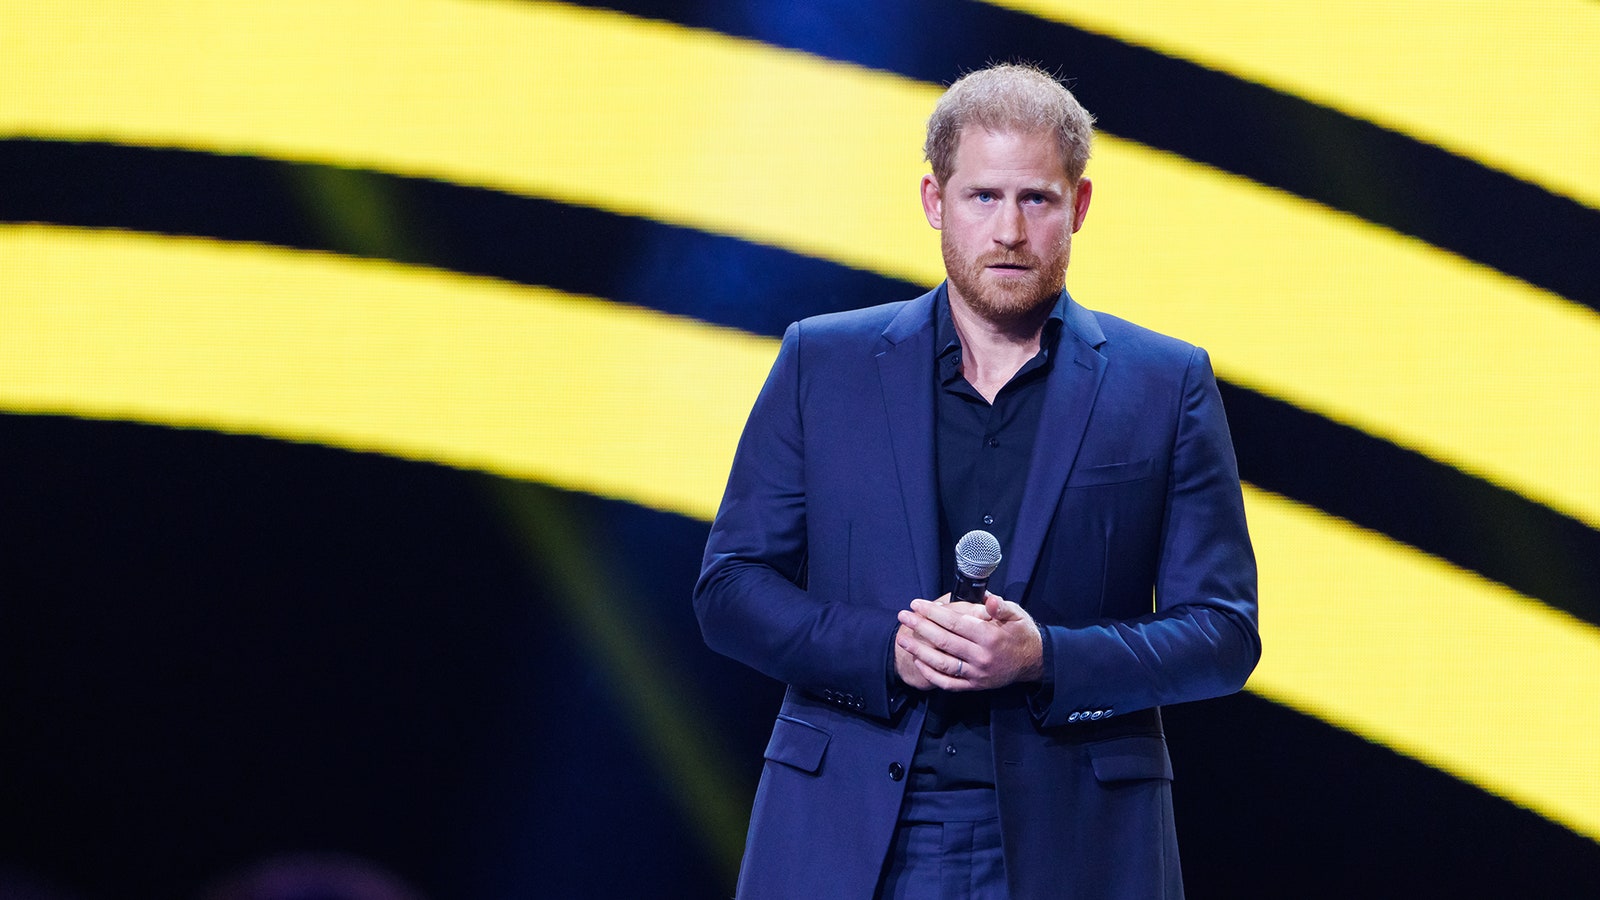 Prince Harry Will Appeal After Losing Legal Battle Over Taxpayer-Funded Police Protection in the UK